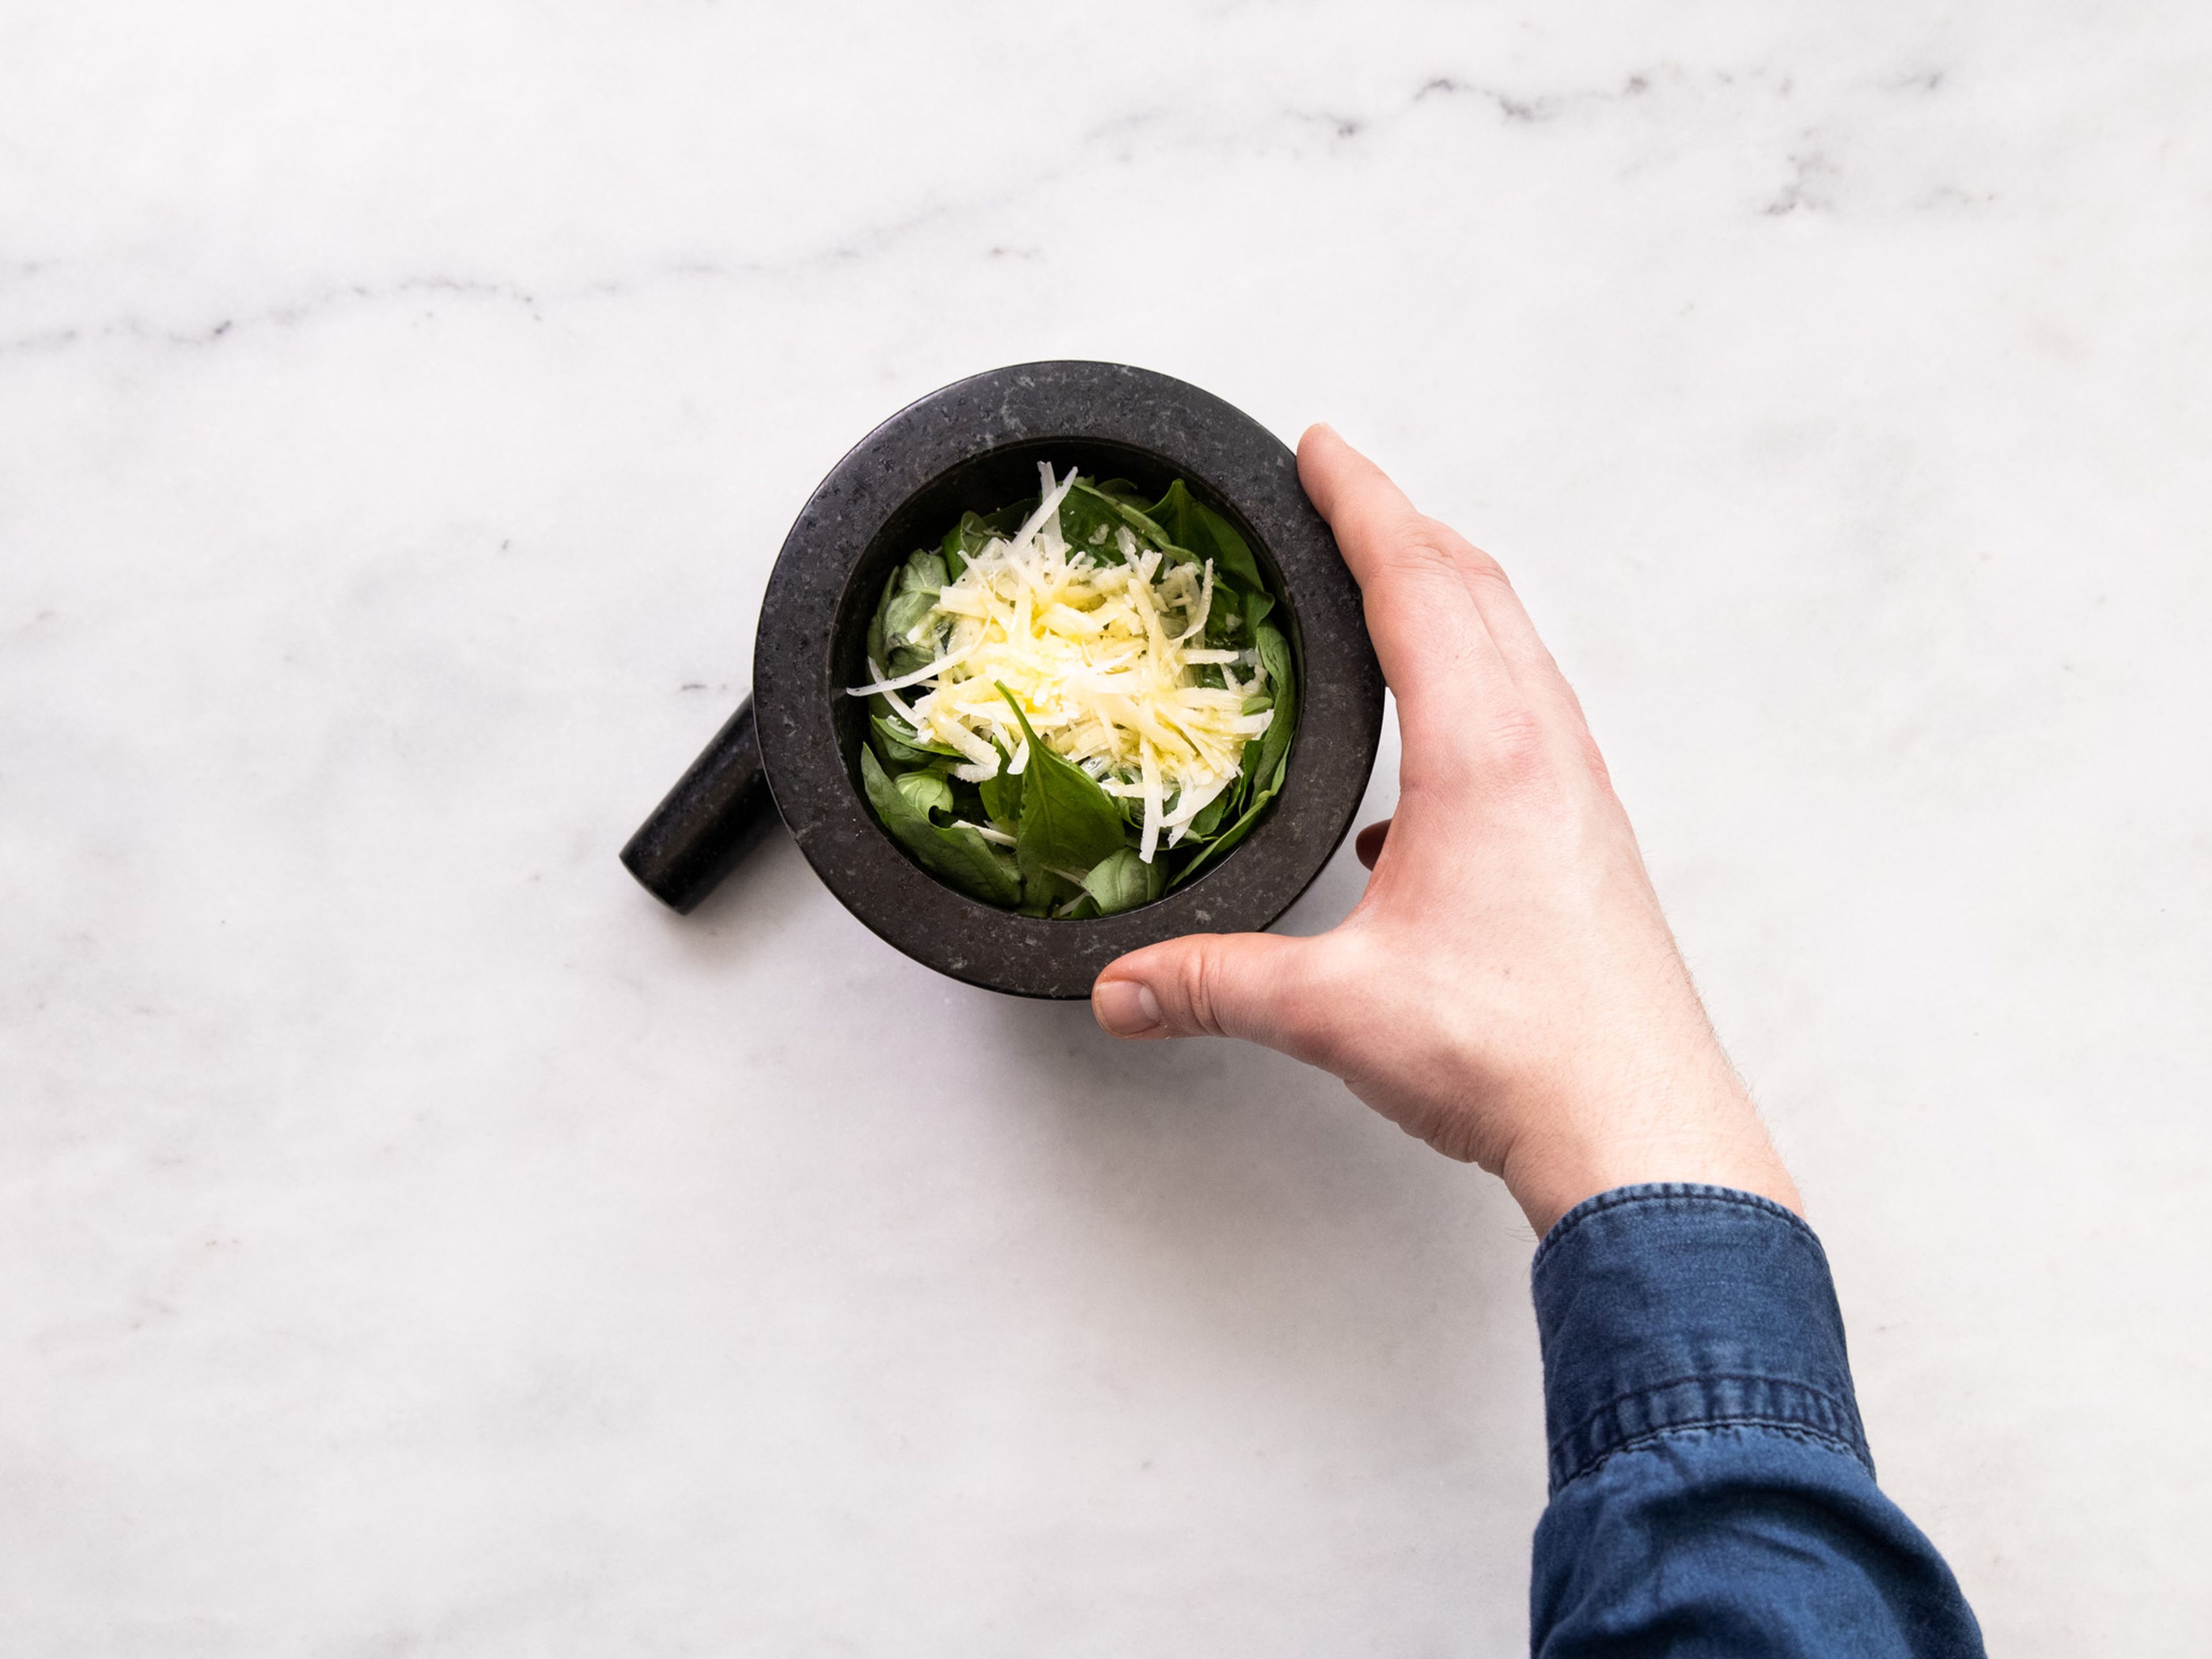 Add toasted pine nuts to a mortar. Add salt, pepper, and garlic and pound with the pestle. Add basil, shredded Parmesan cheese, and some olive oil and smash together to form the pesto. Set aside.